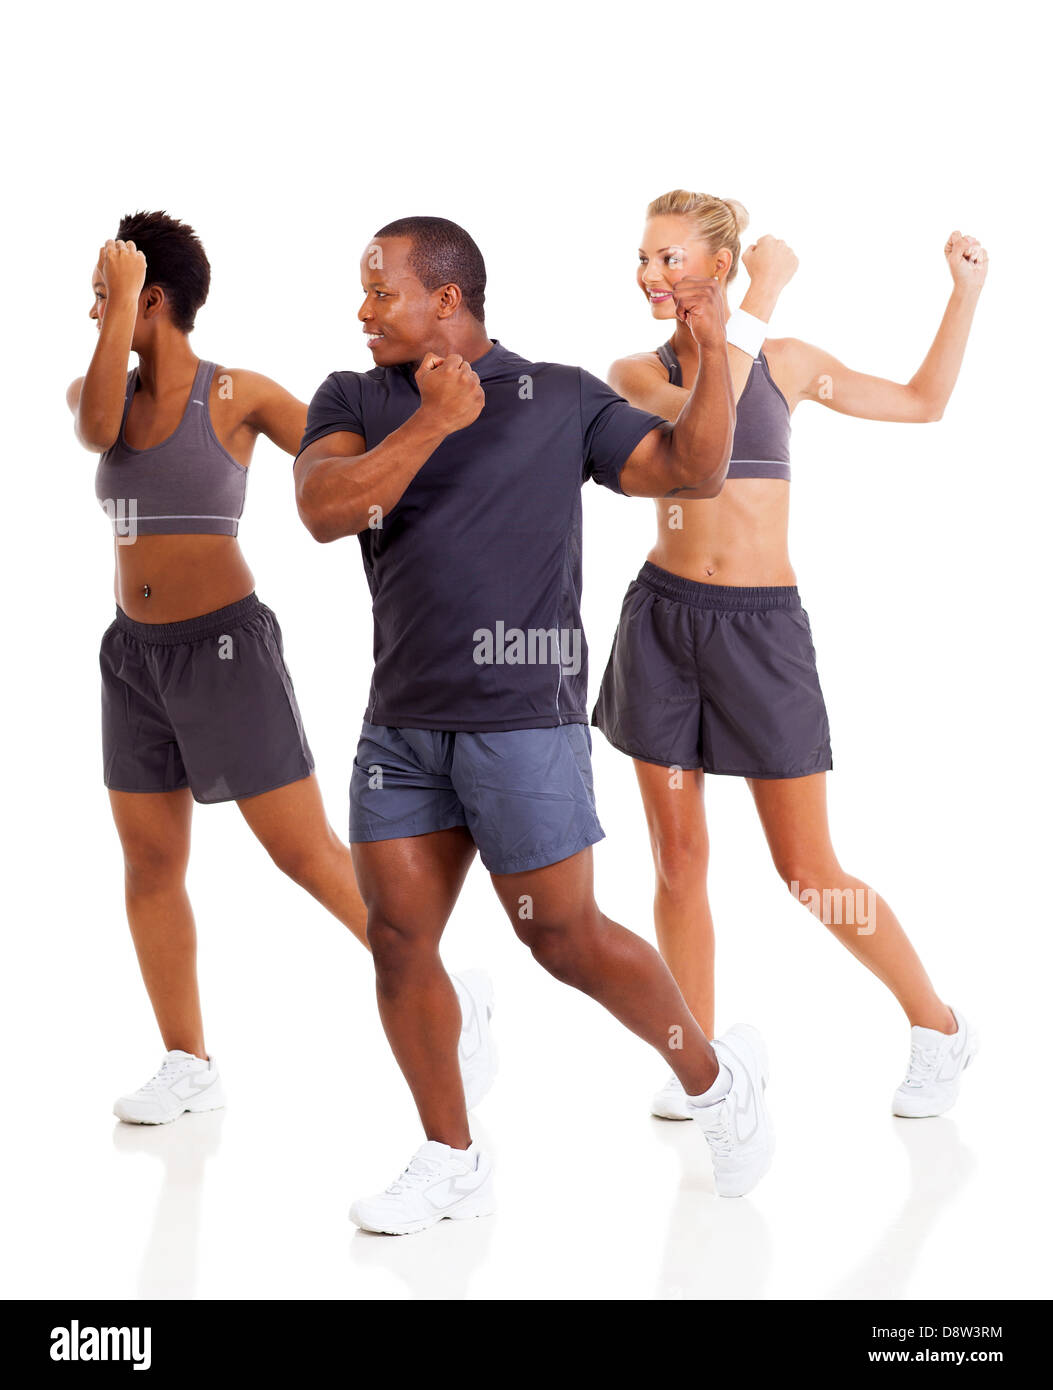 group of people doing aerobics exercise over white background Stock Photo